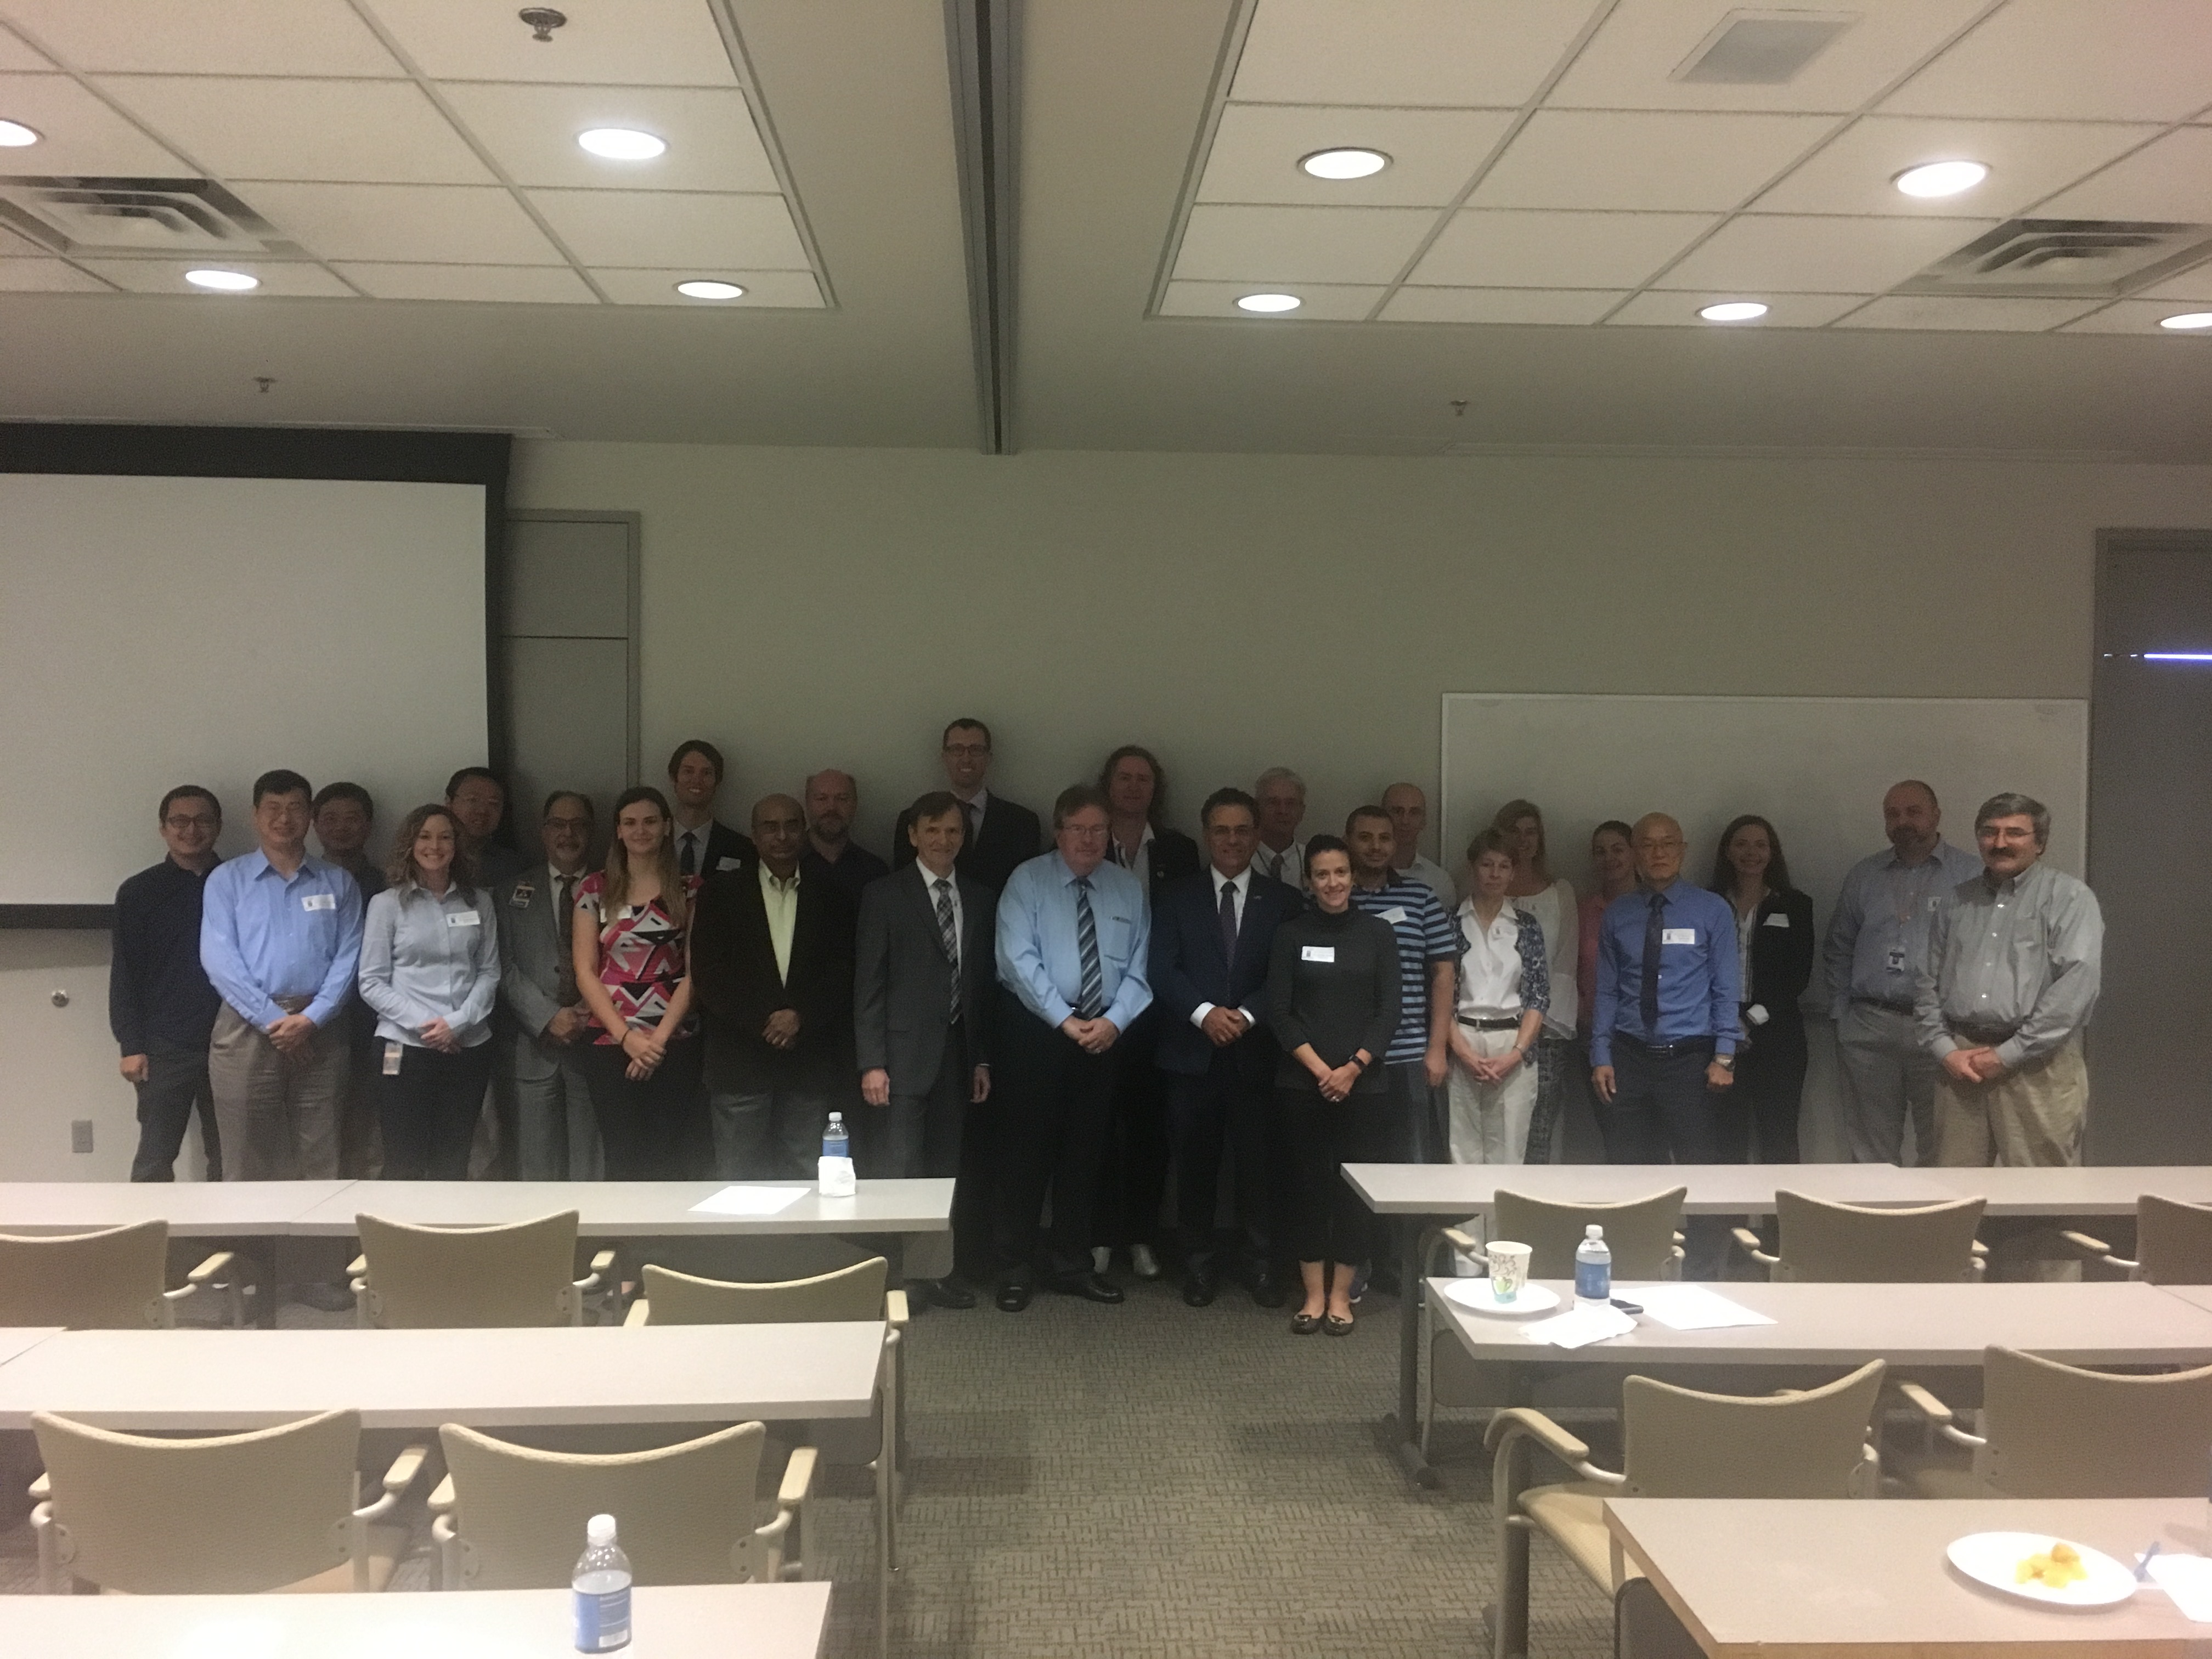 LSU Biomedical Collaborative Research Program 2018 symposium at LSU Health Sciences Center - New Orleans